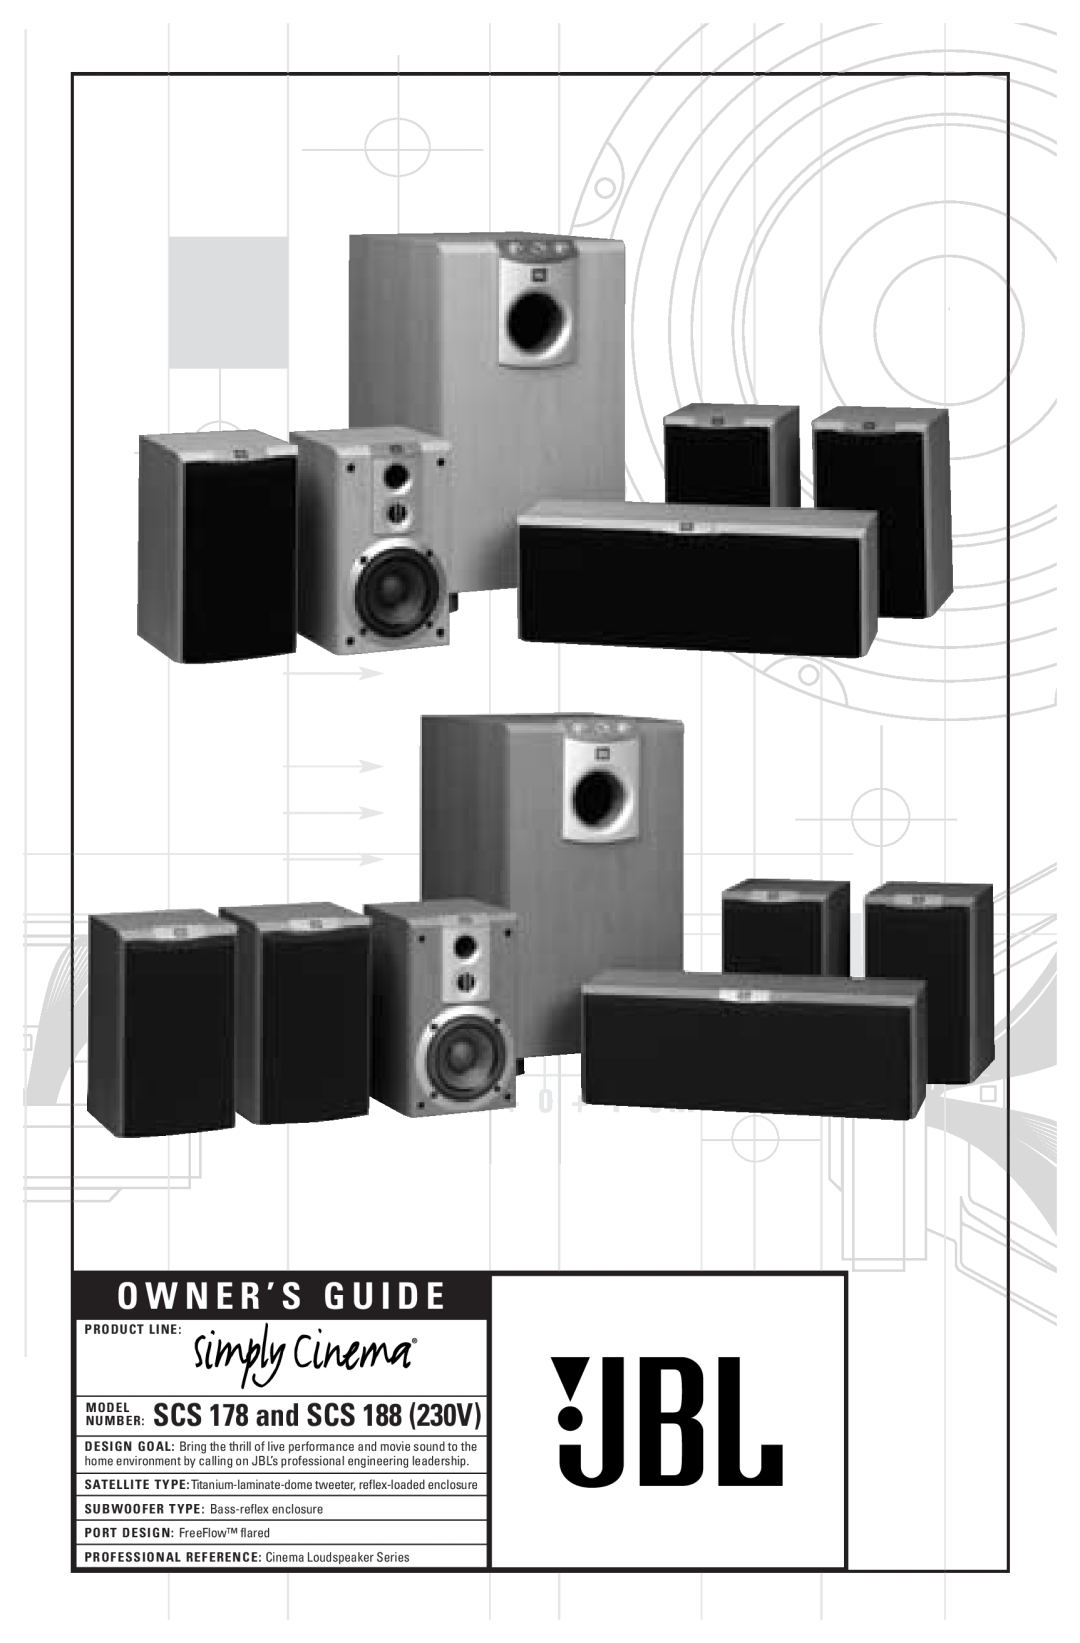 JBL SCS 188 manual O W N E R ’ S G U I D E, X + 0 + Y 2 0 M, MODEL SCS 178 and SCS, Product Line, Number 